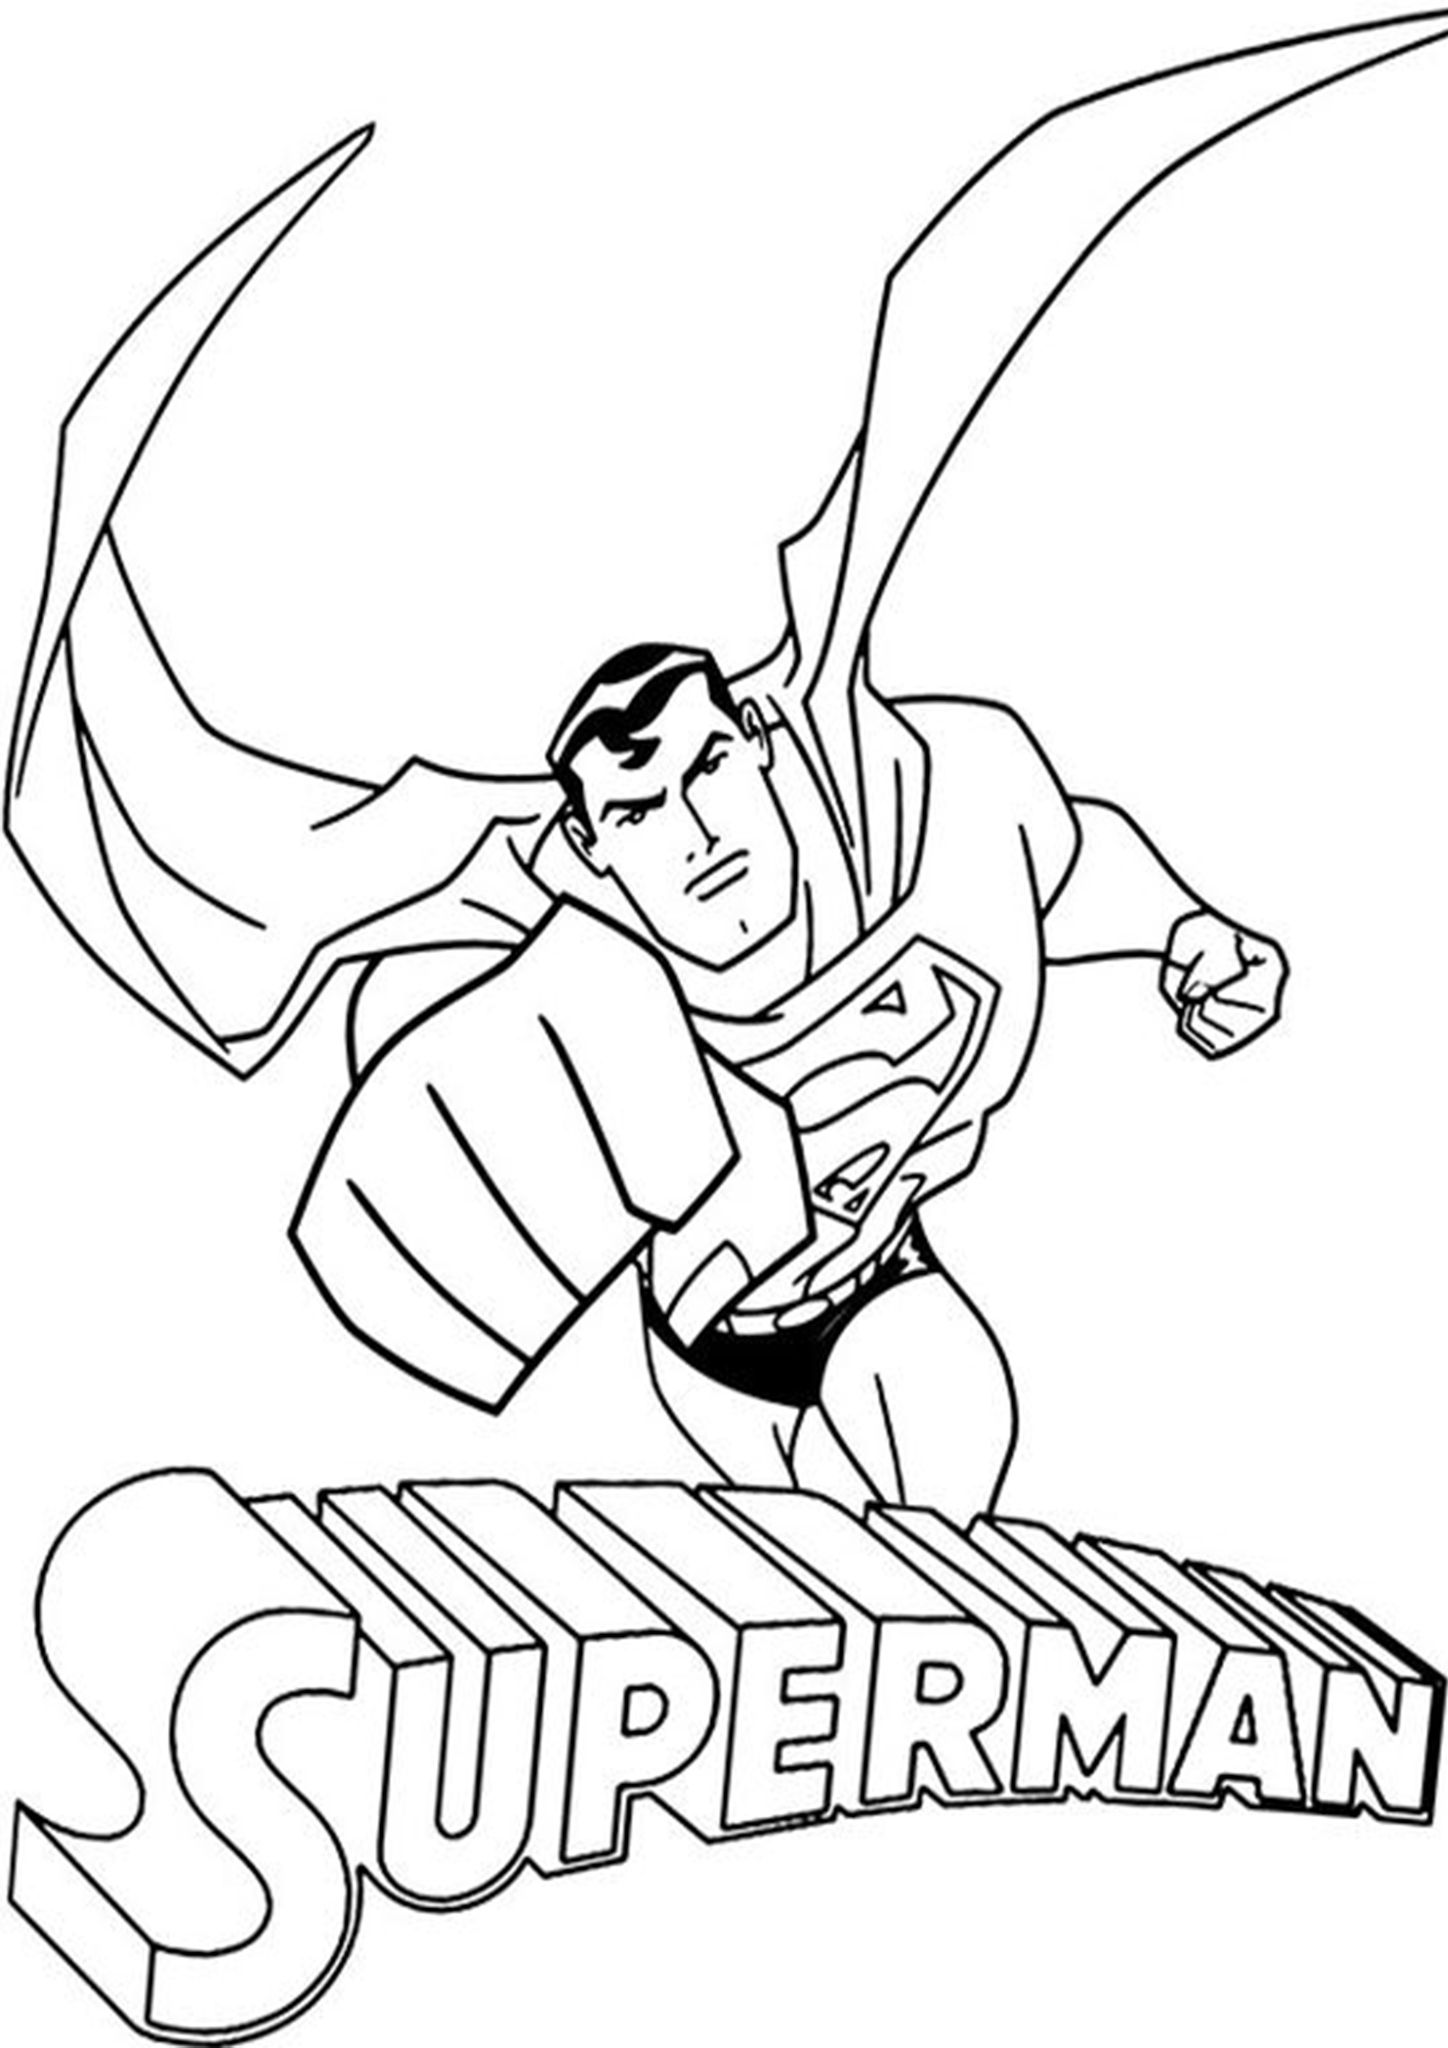 Free easy to print superman coloring pages superman coloring pages superhero coloring pages superhero coloring